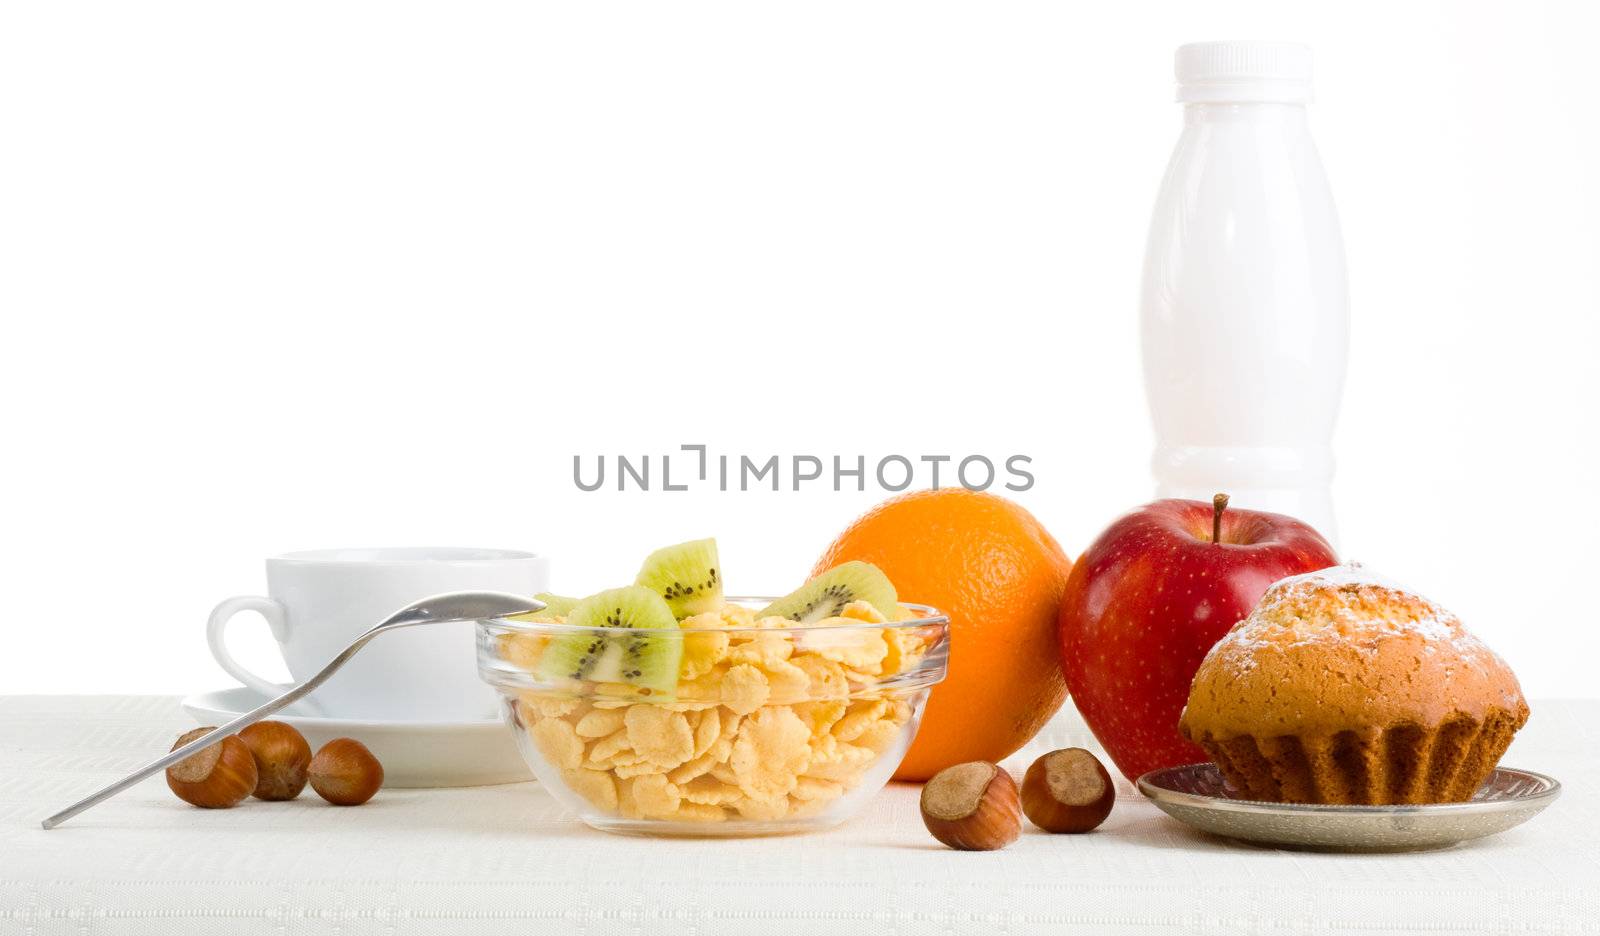 Healthy morning meal, still life isolated on white